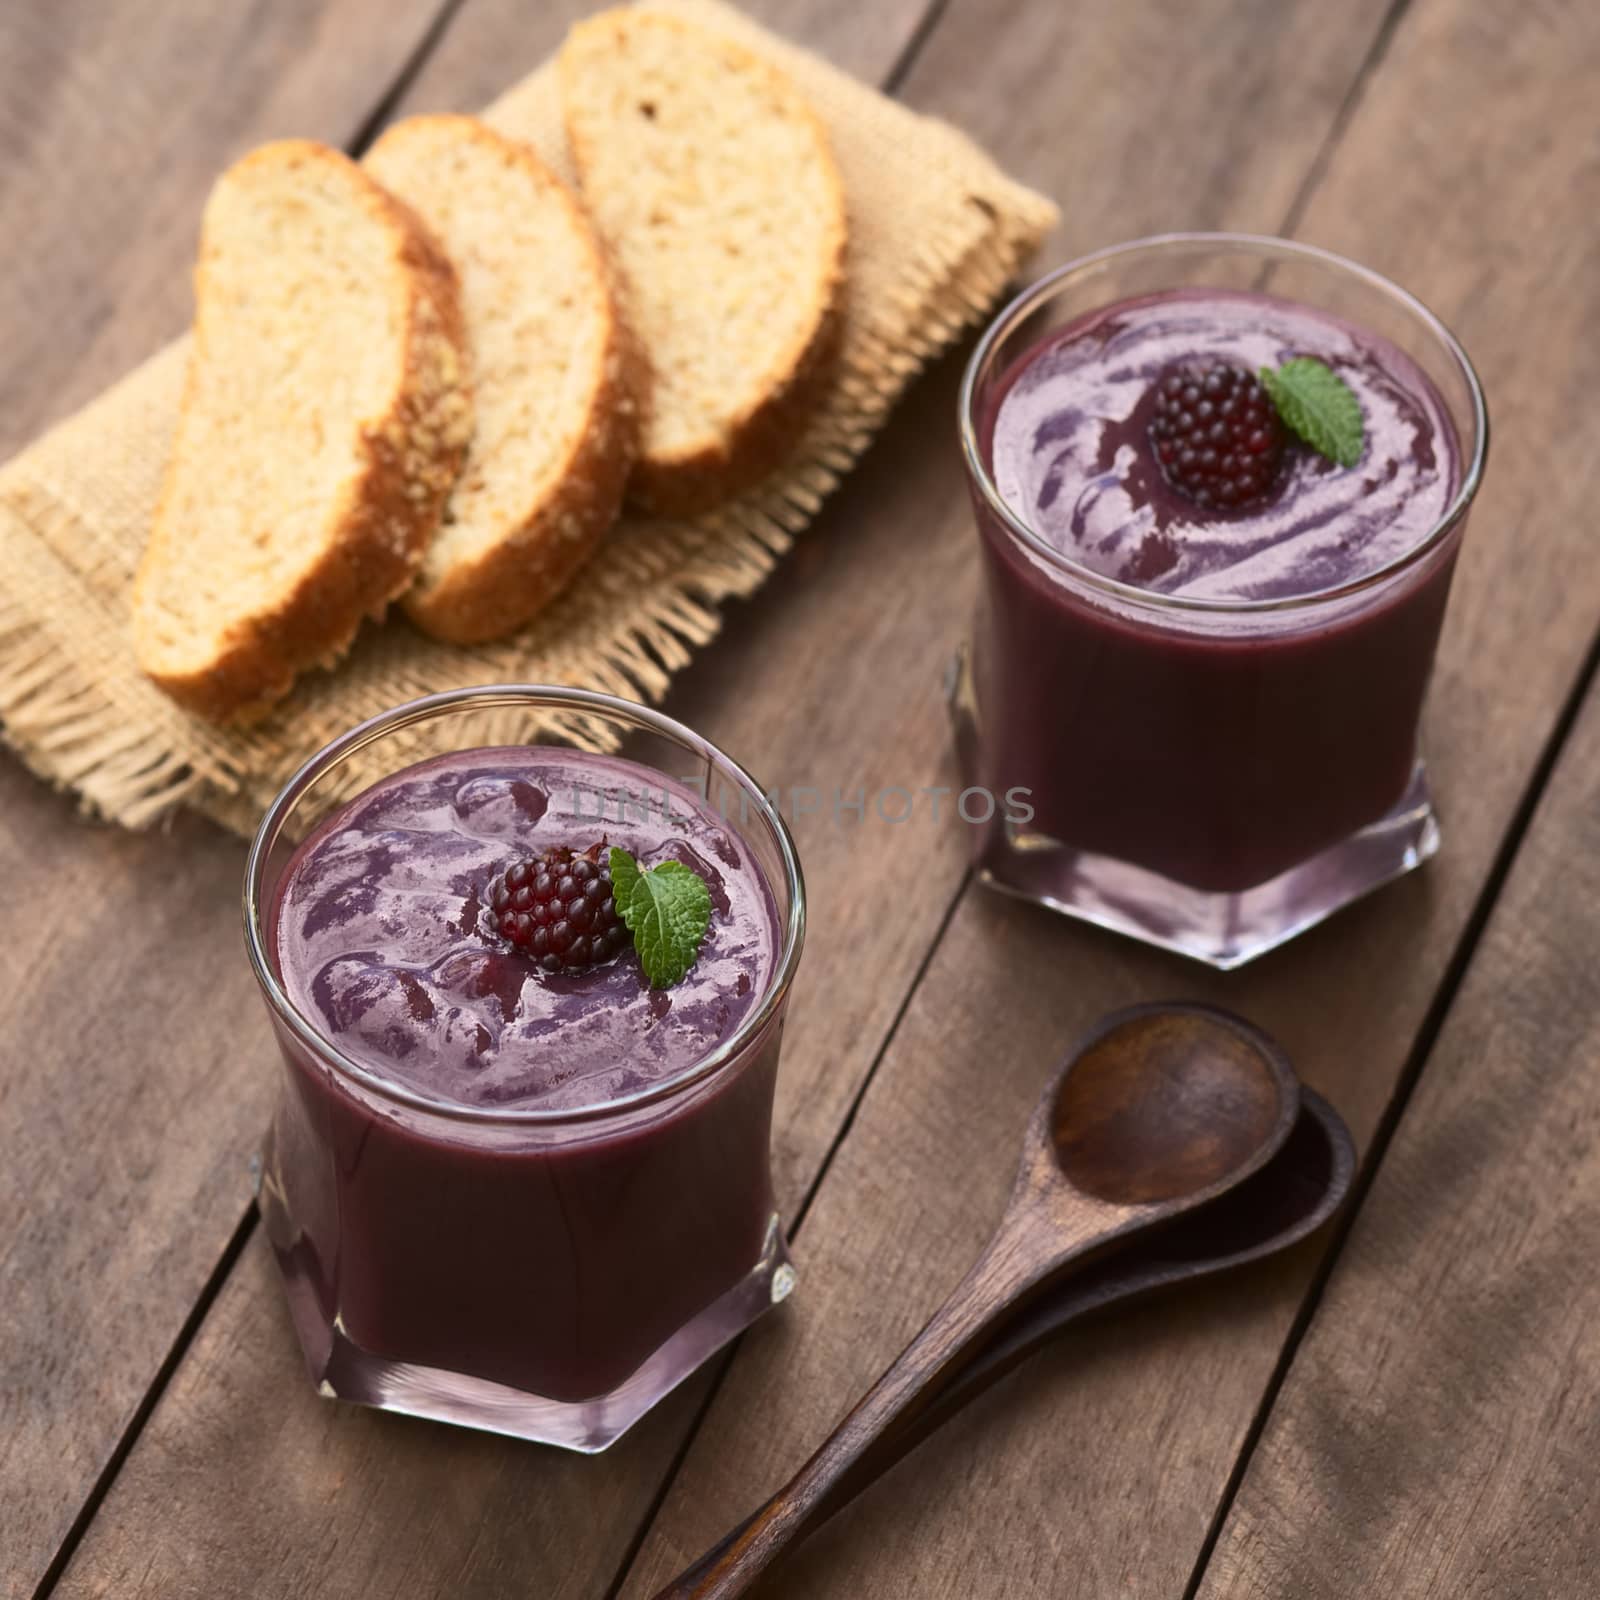 Ecuadorian traditional thick drink called Colada Morada, prepared by cooking purple corn flour and different fruits (for example strawberry, pineapple, naranjilla, grape, babaco, blackberry, etc) and seasoned with panela (cane sugar), cinnamon, allspice and cloves; accompanied by bread (Selective Focus, Focus on the blackberry on the first drink)